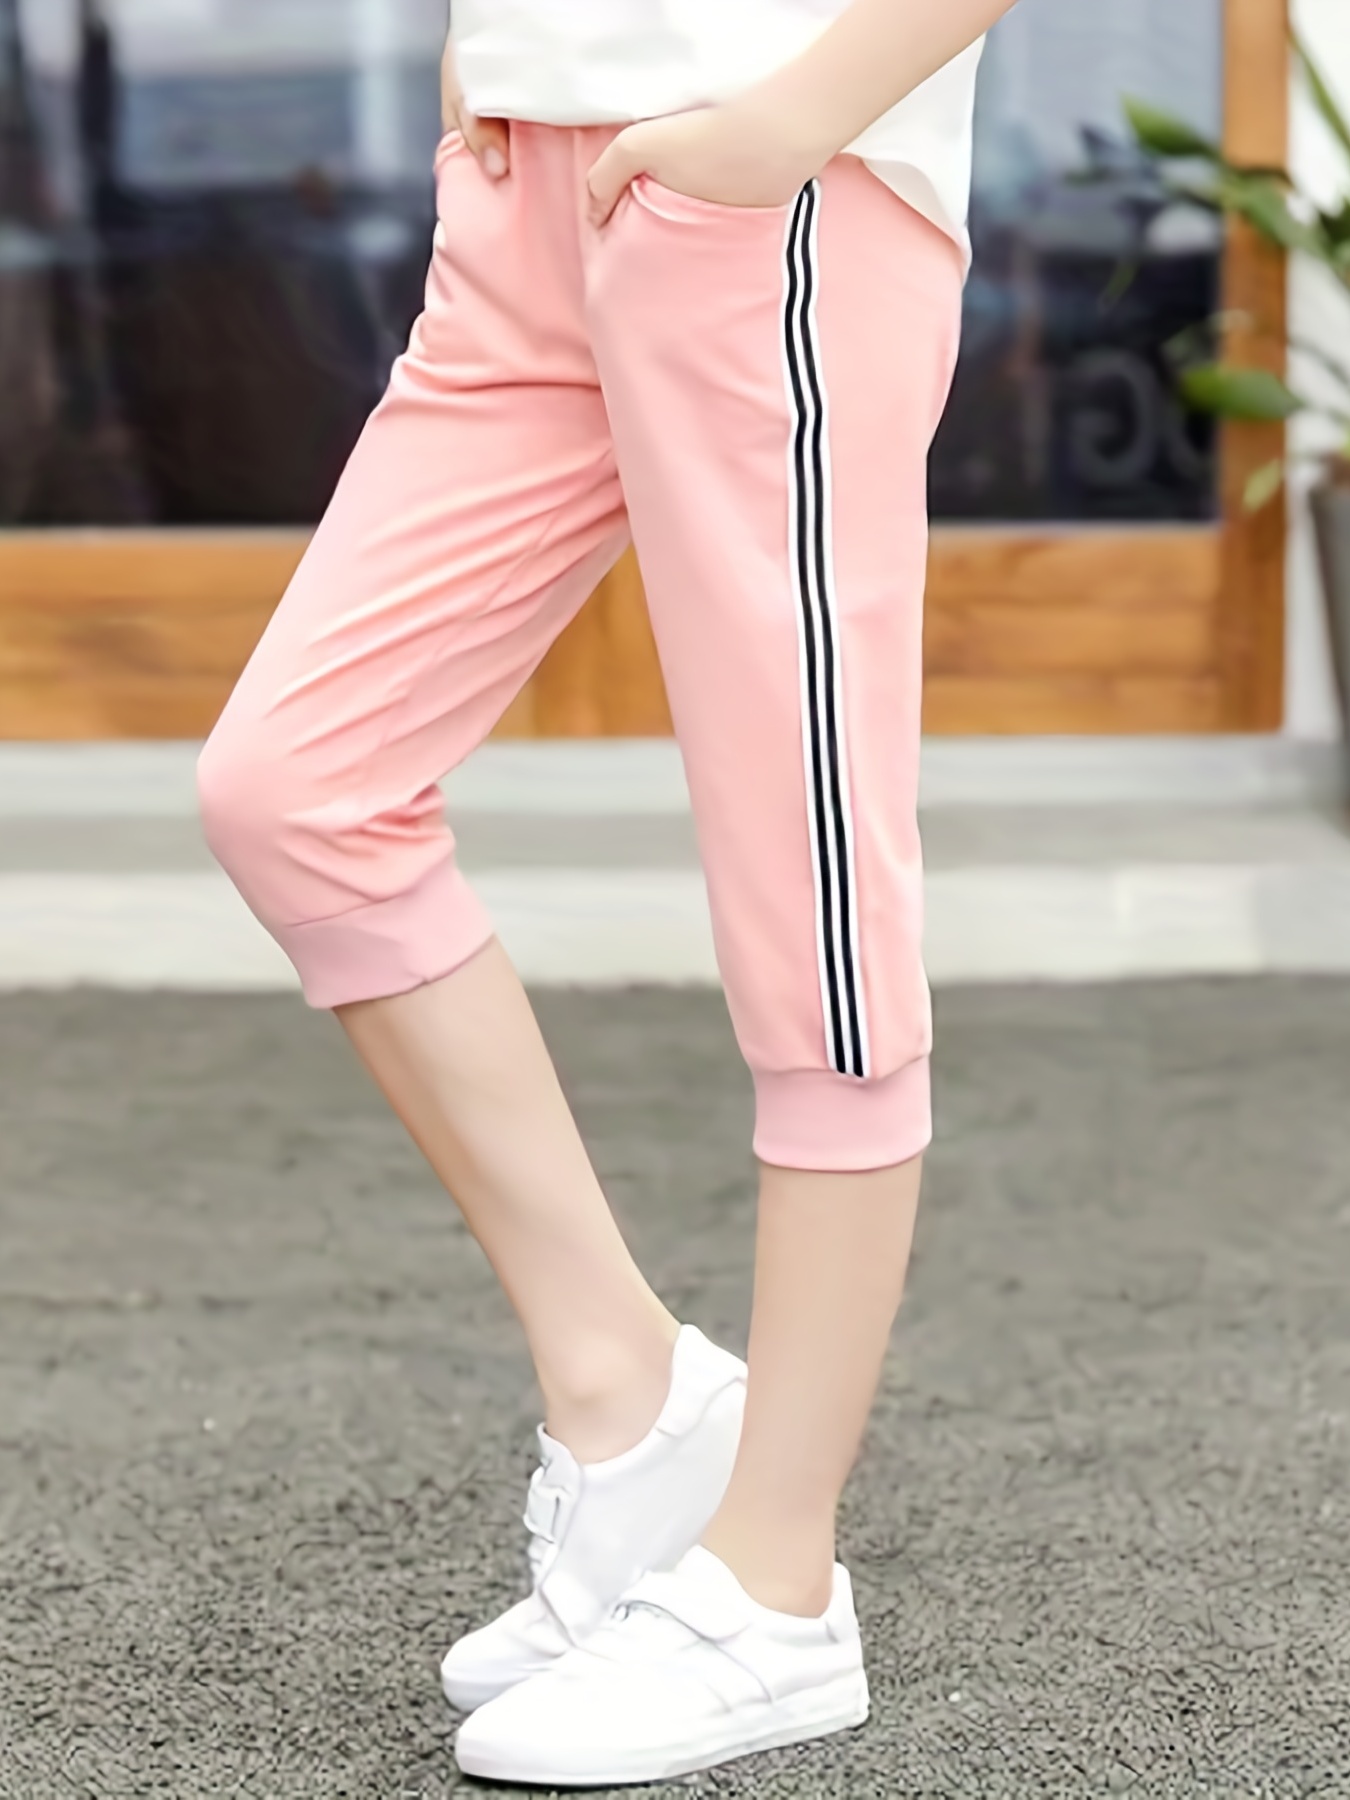 Capris for Women Casual Summer Slim Fit Cropped Pants Athletic